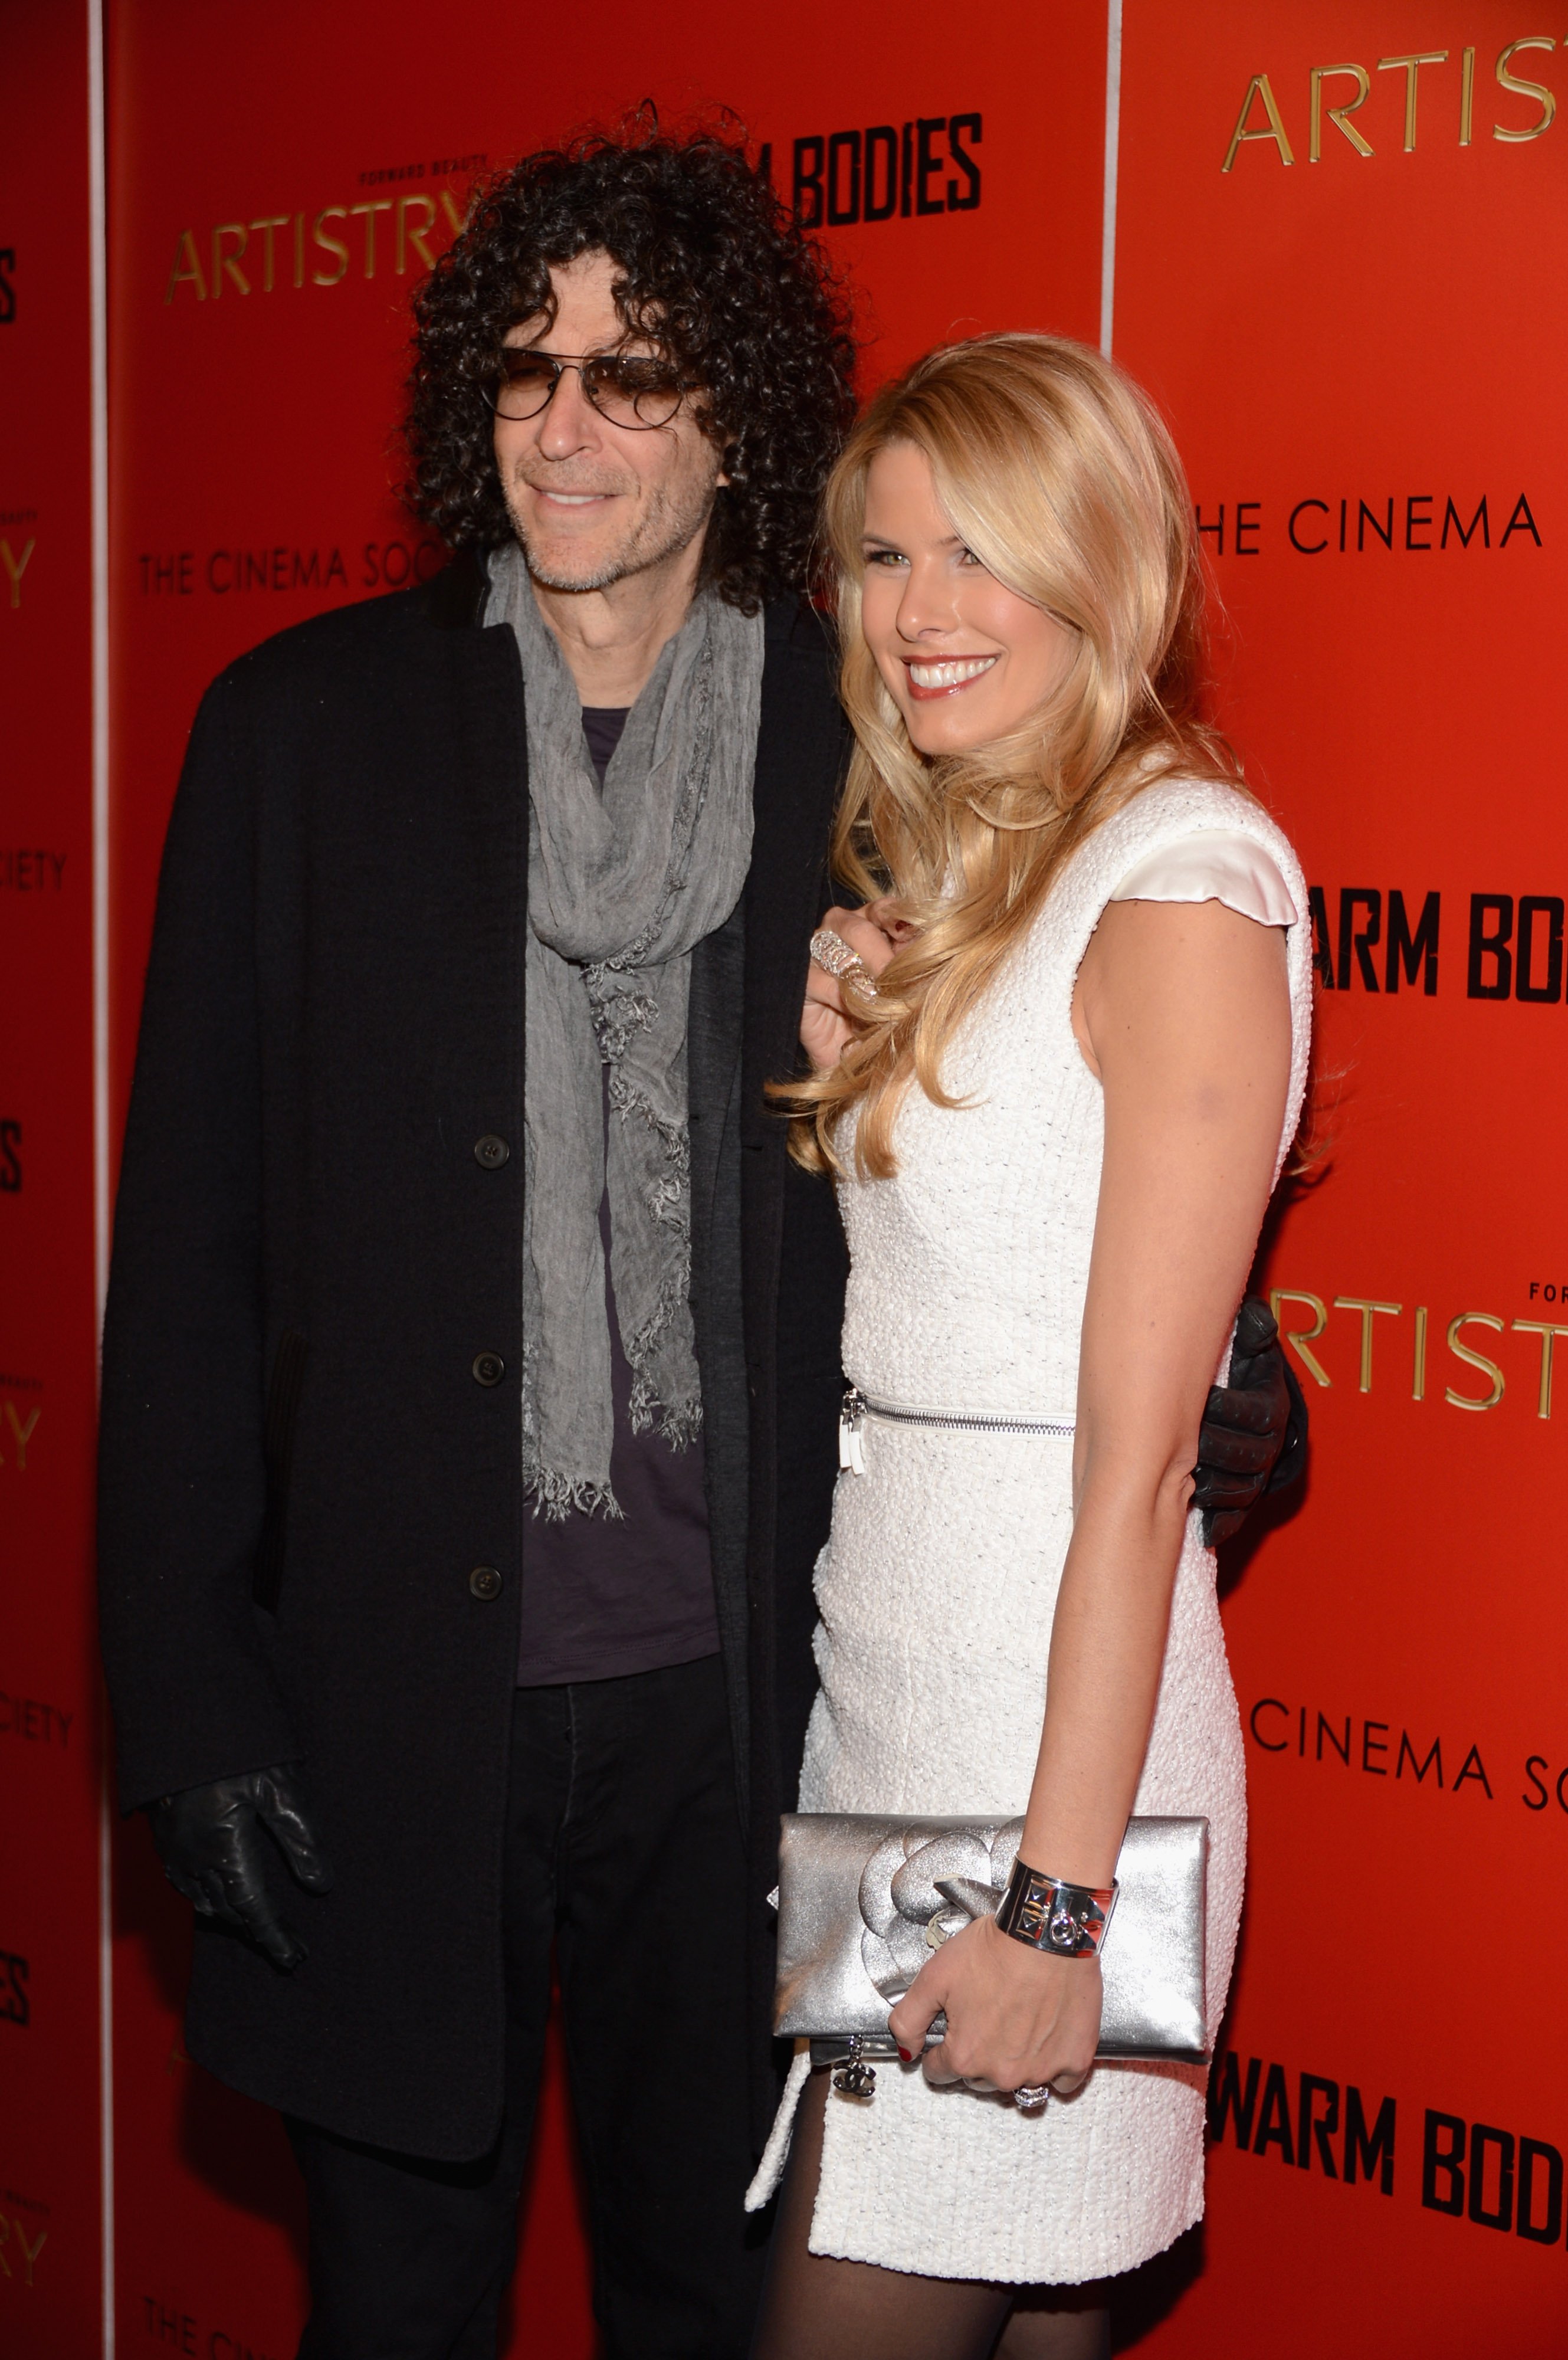 Howard Stern and Beth Ostrosky Stern attend a screening of "Warm Bodies" hosted by The Cinema Society at Landmark's Sunshine Cinema on January 25, 2013 | Photo: GettyImages